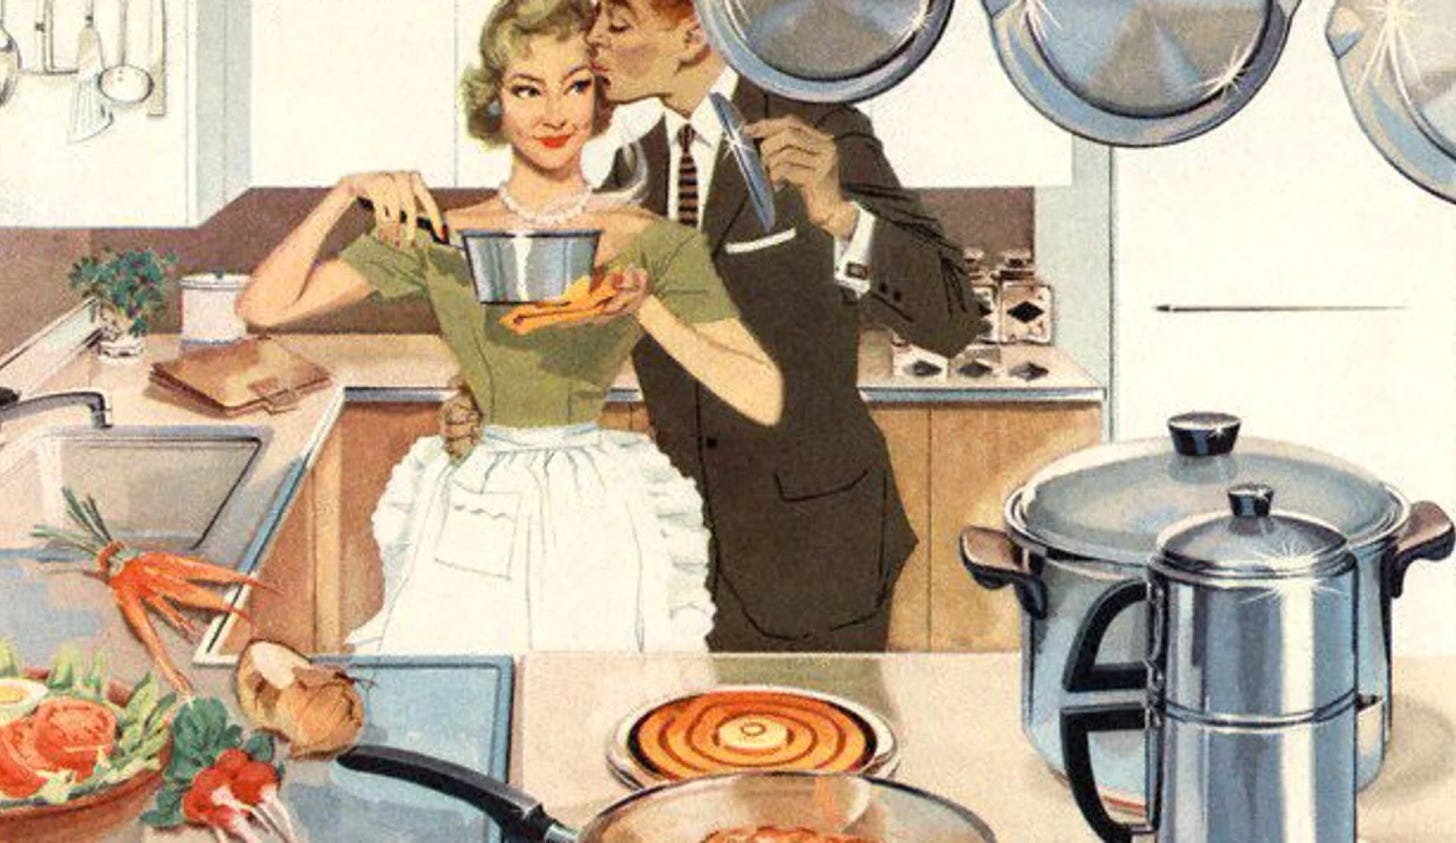 Learn The Secrets Of A 1950s Housewife's Cleaning Routine | Evie Magazine